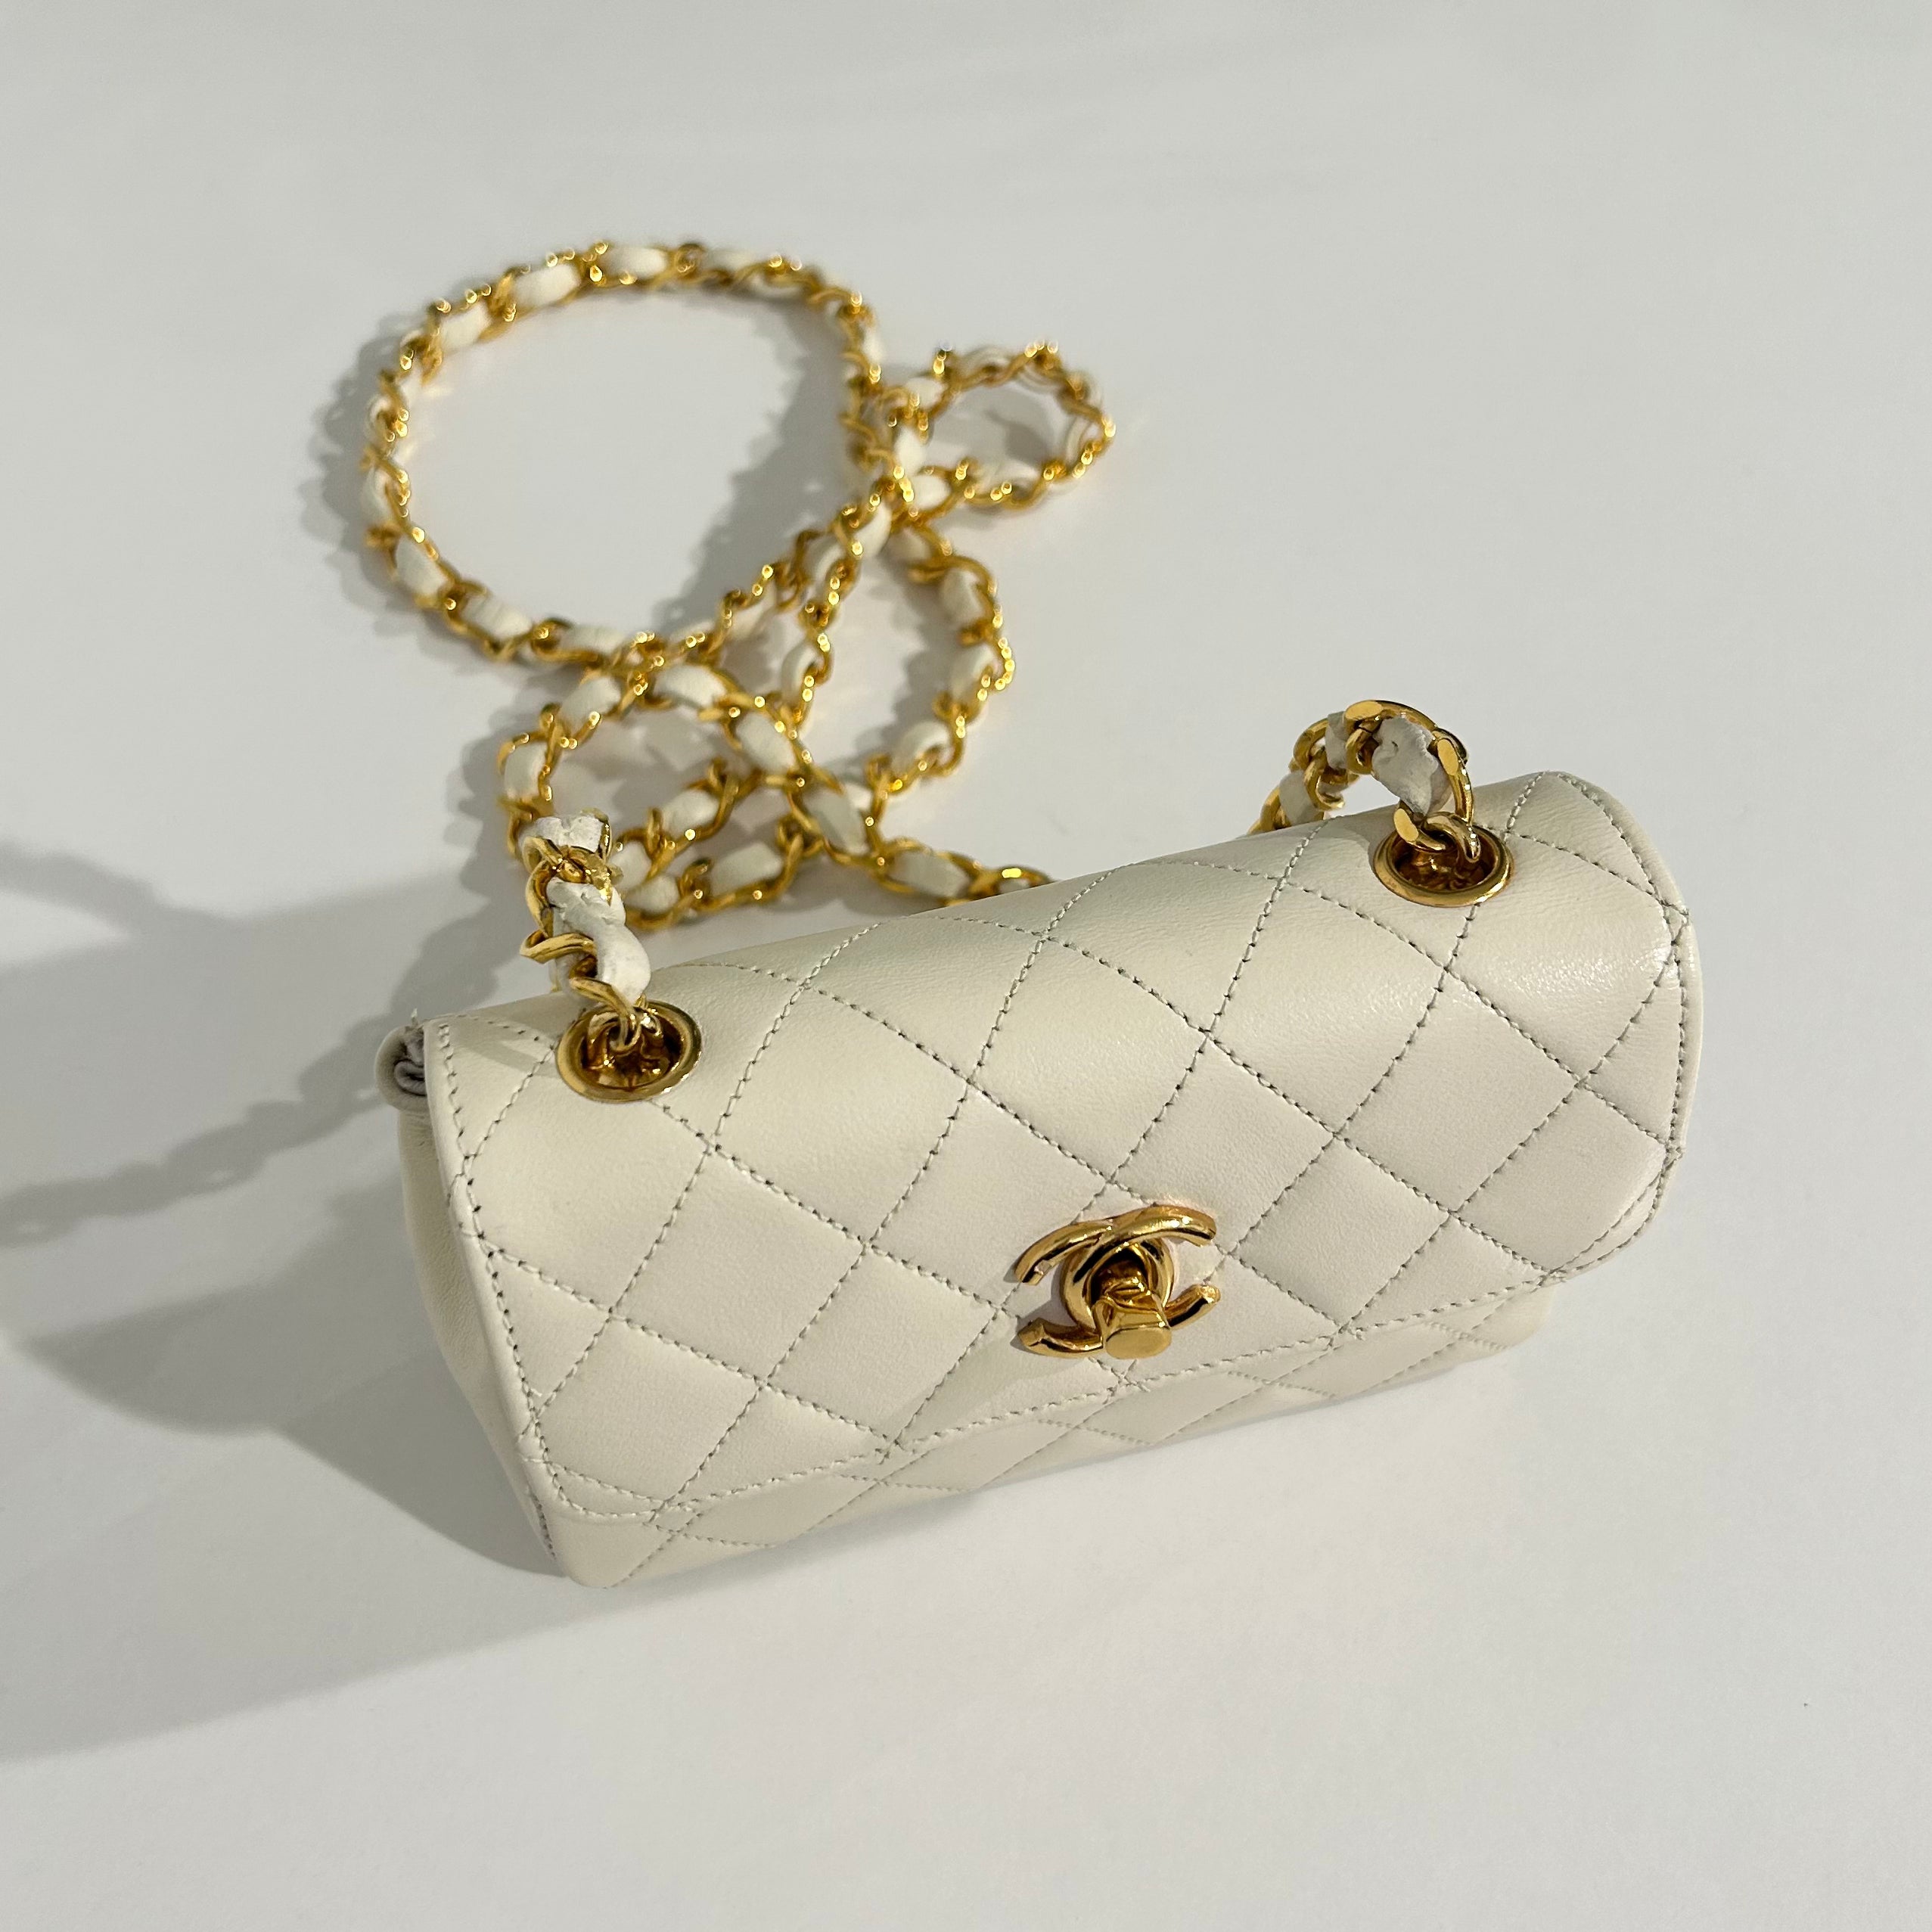 Chanel flap coin purse with chain +dior unboxing! cutest mini Chanel bag 